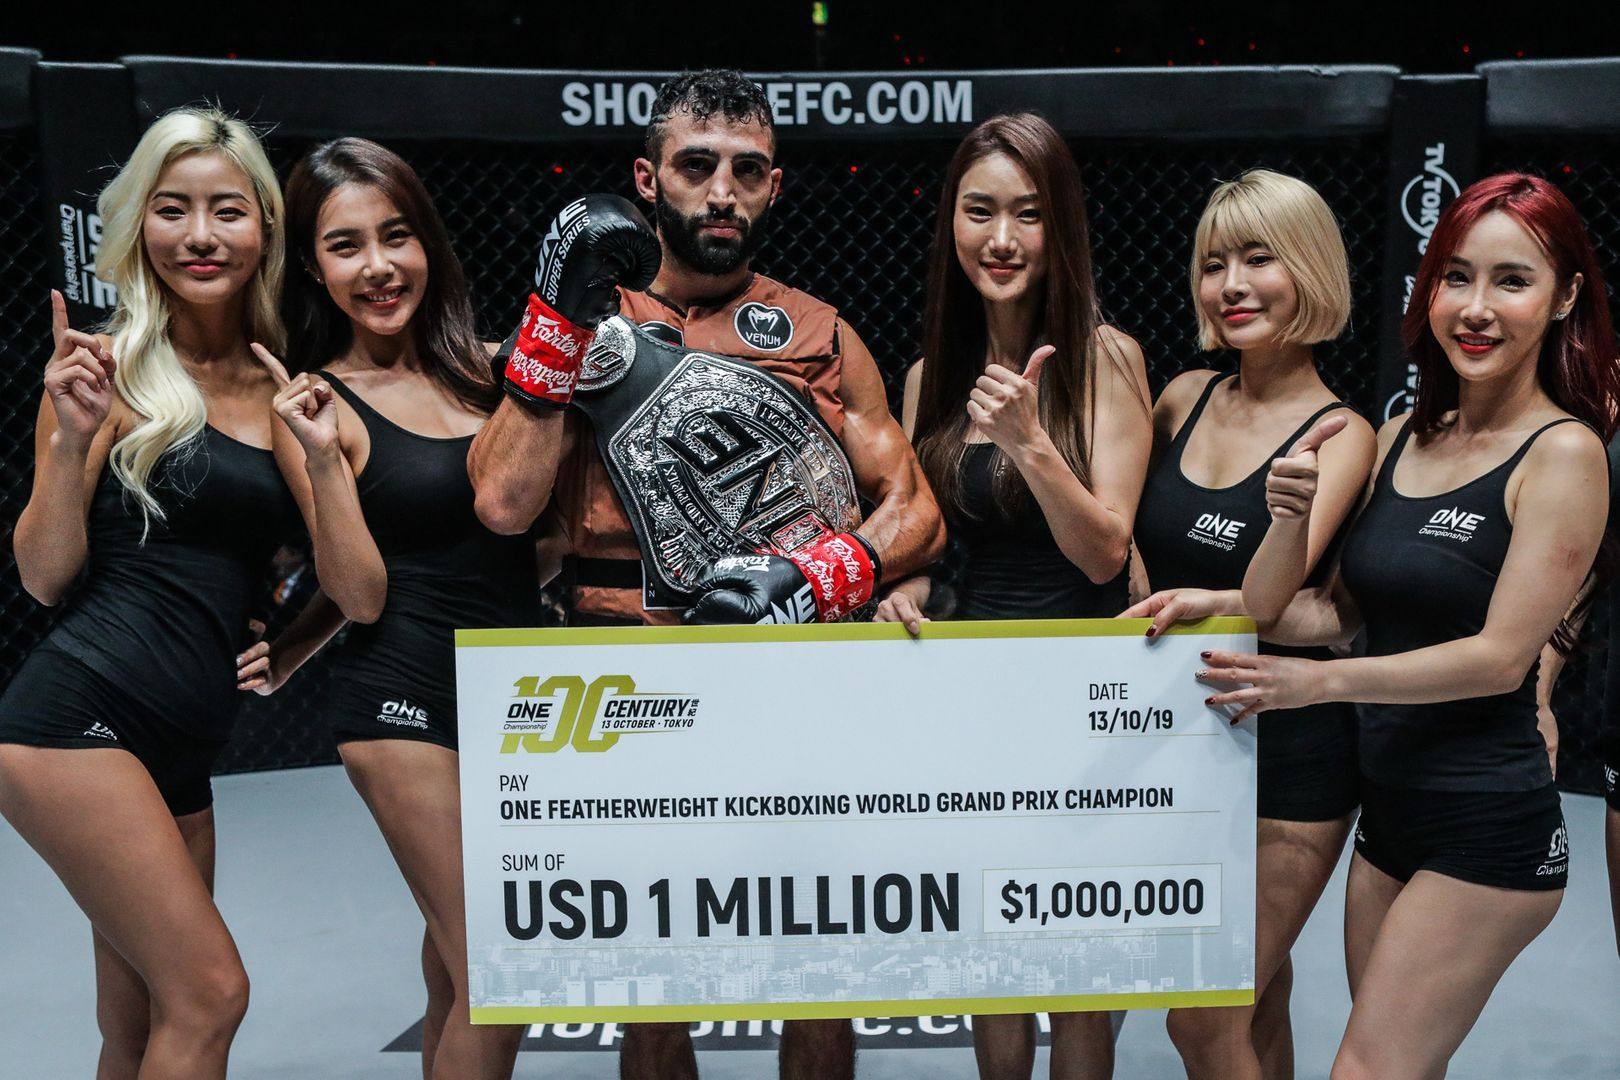 ONE Championship are bringing back the featherweight kickboxing grand prix for a fourth time. Photo: ONE Championship